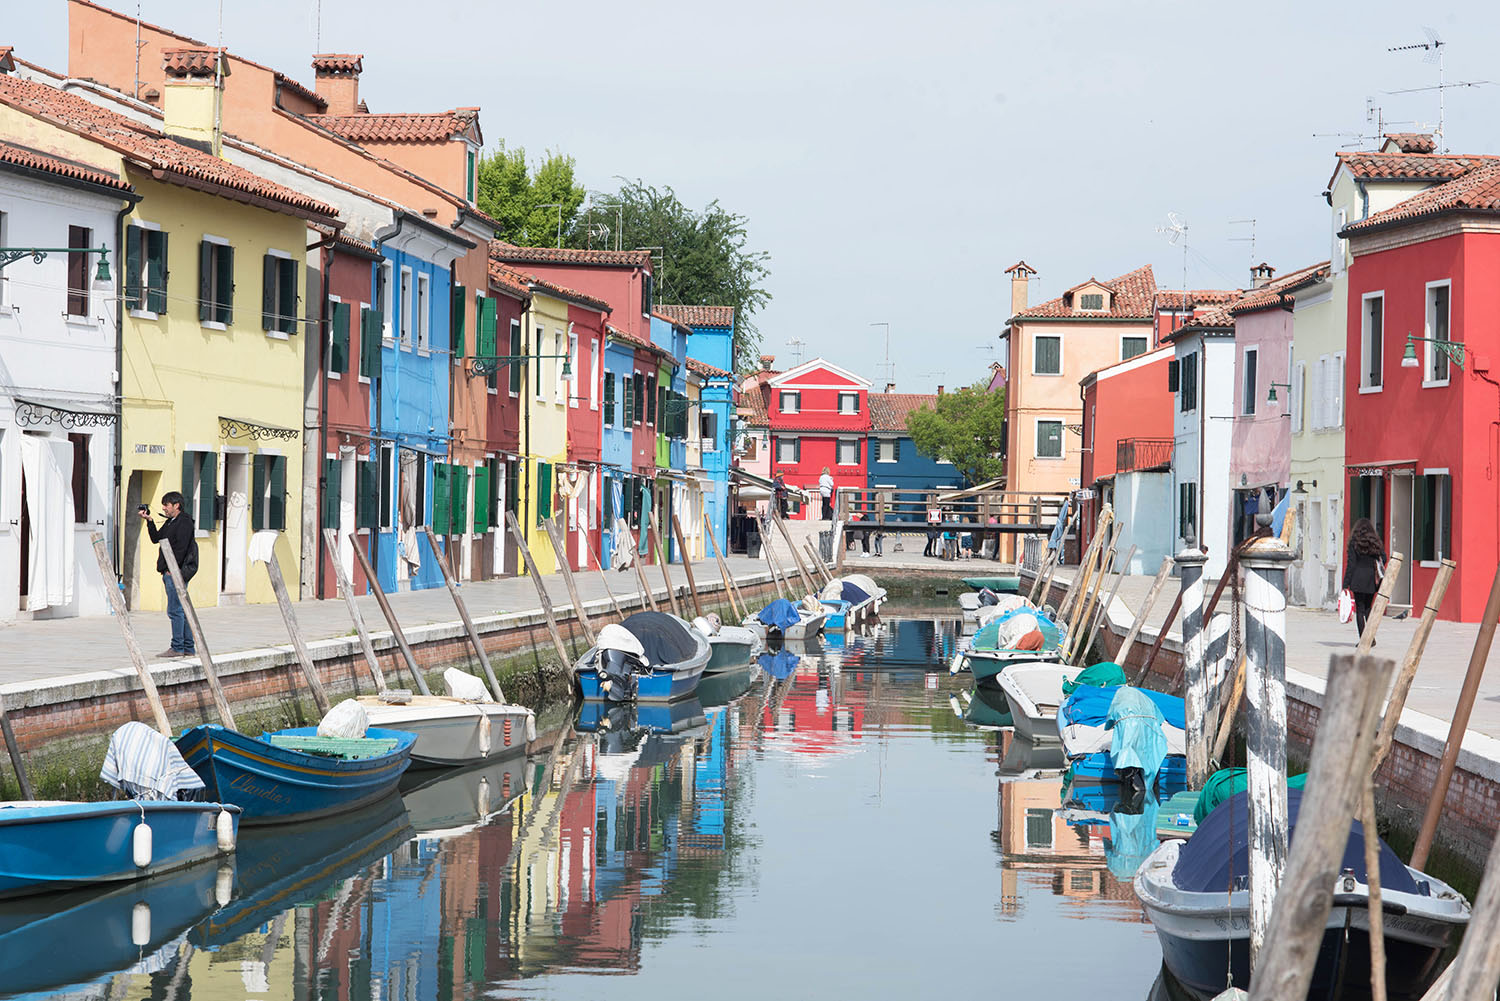 Brightly coloured houses line the canal on the island of Burano in Italy, captured by travel blogger Cee Fardoe of Coco & Vera